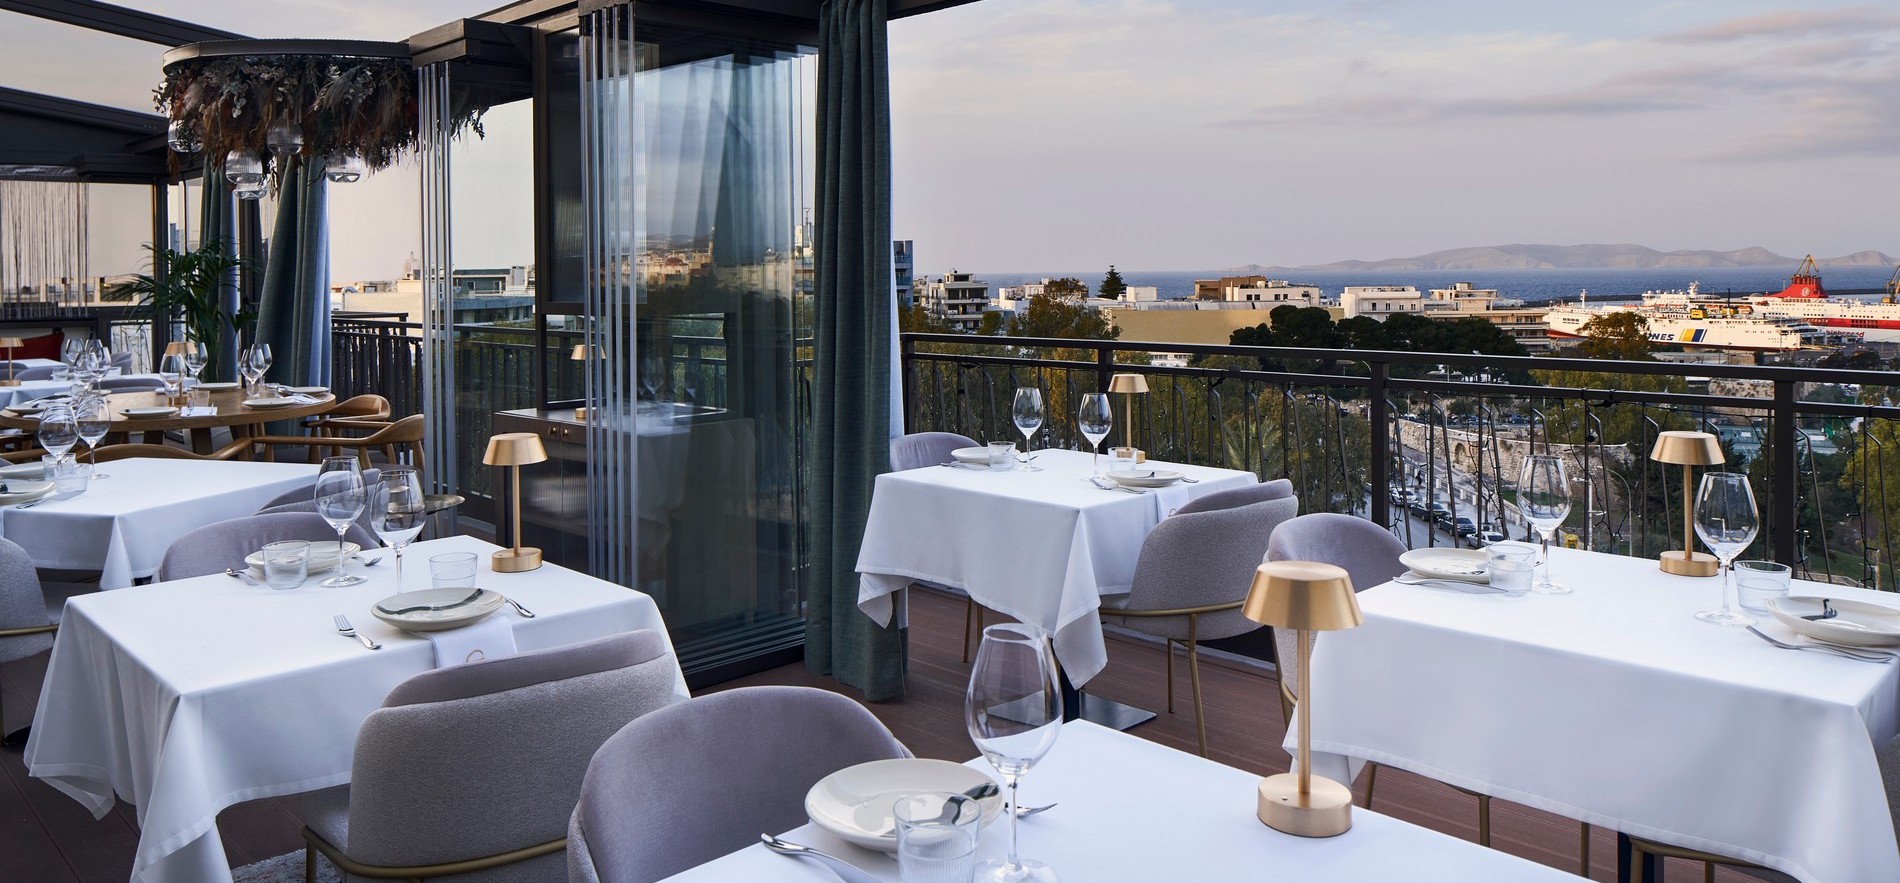 Experience the Tastes of Crete at Legacy Gastro Suites Restaurants ...